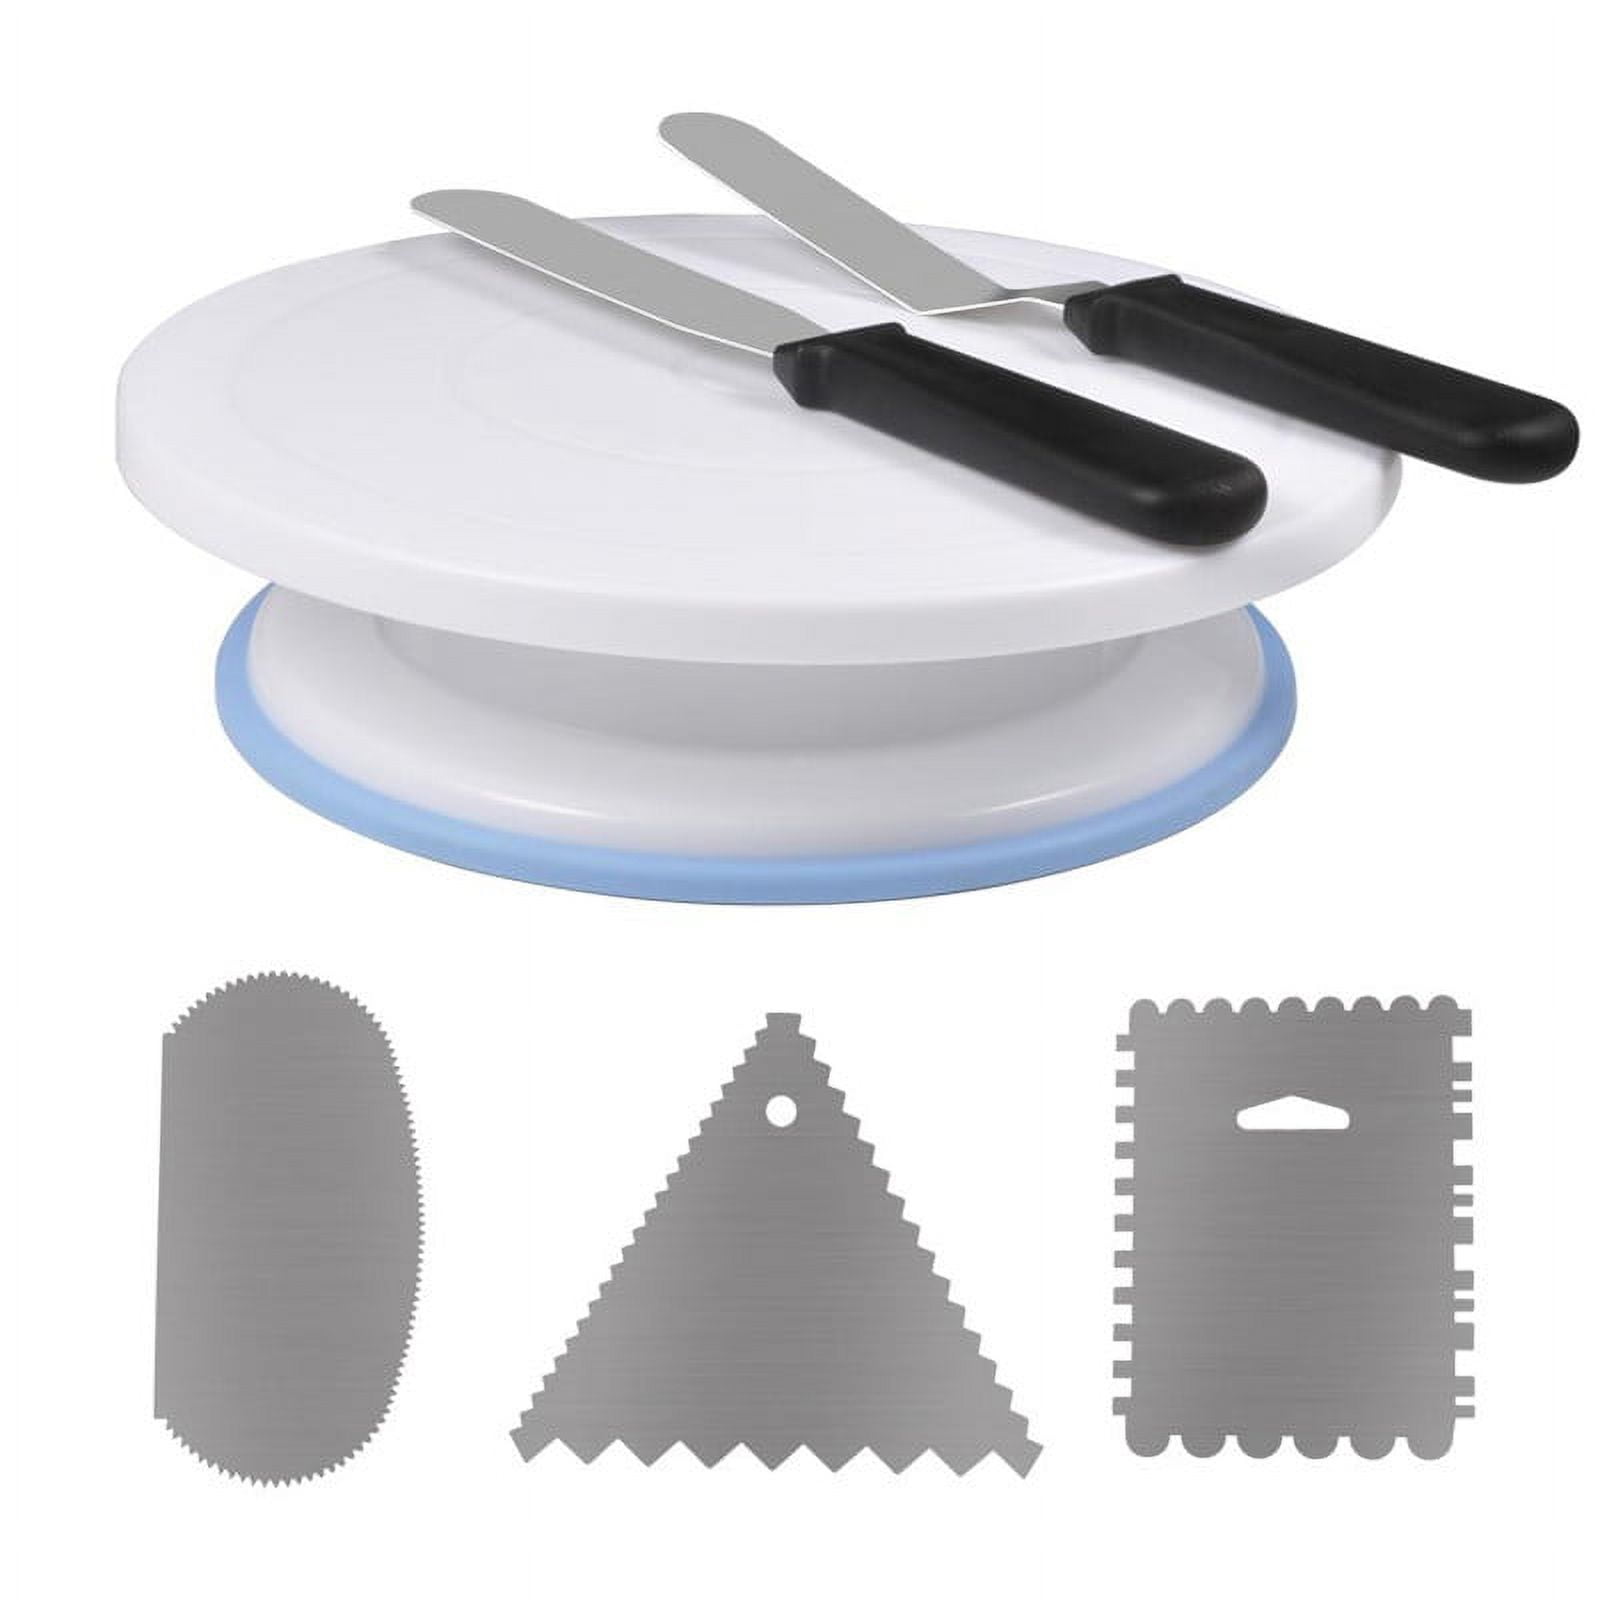 Dropship 11in Rotating Cake Turntable 108Pcs Cake Decorating Supplies Kit Revolving  Cake Table Stand Base Baking Tools to Sell Online at a Lower Price